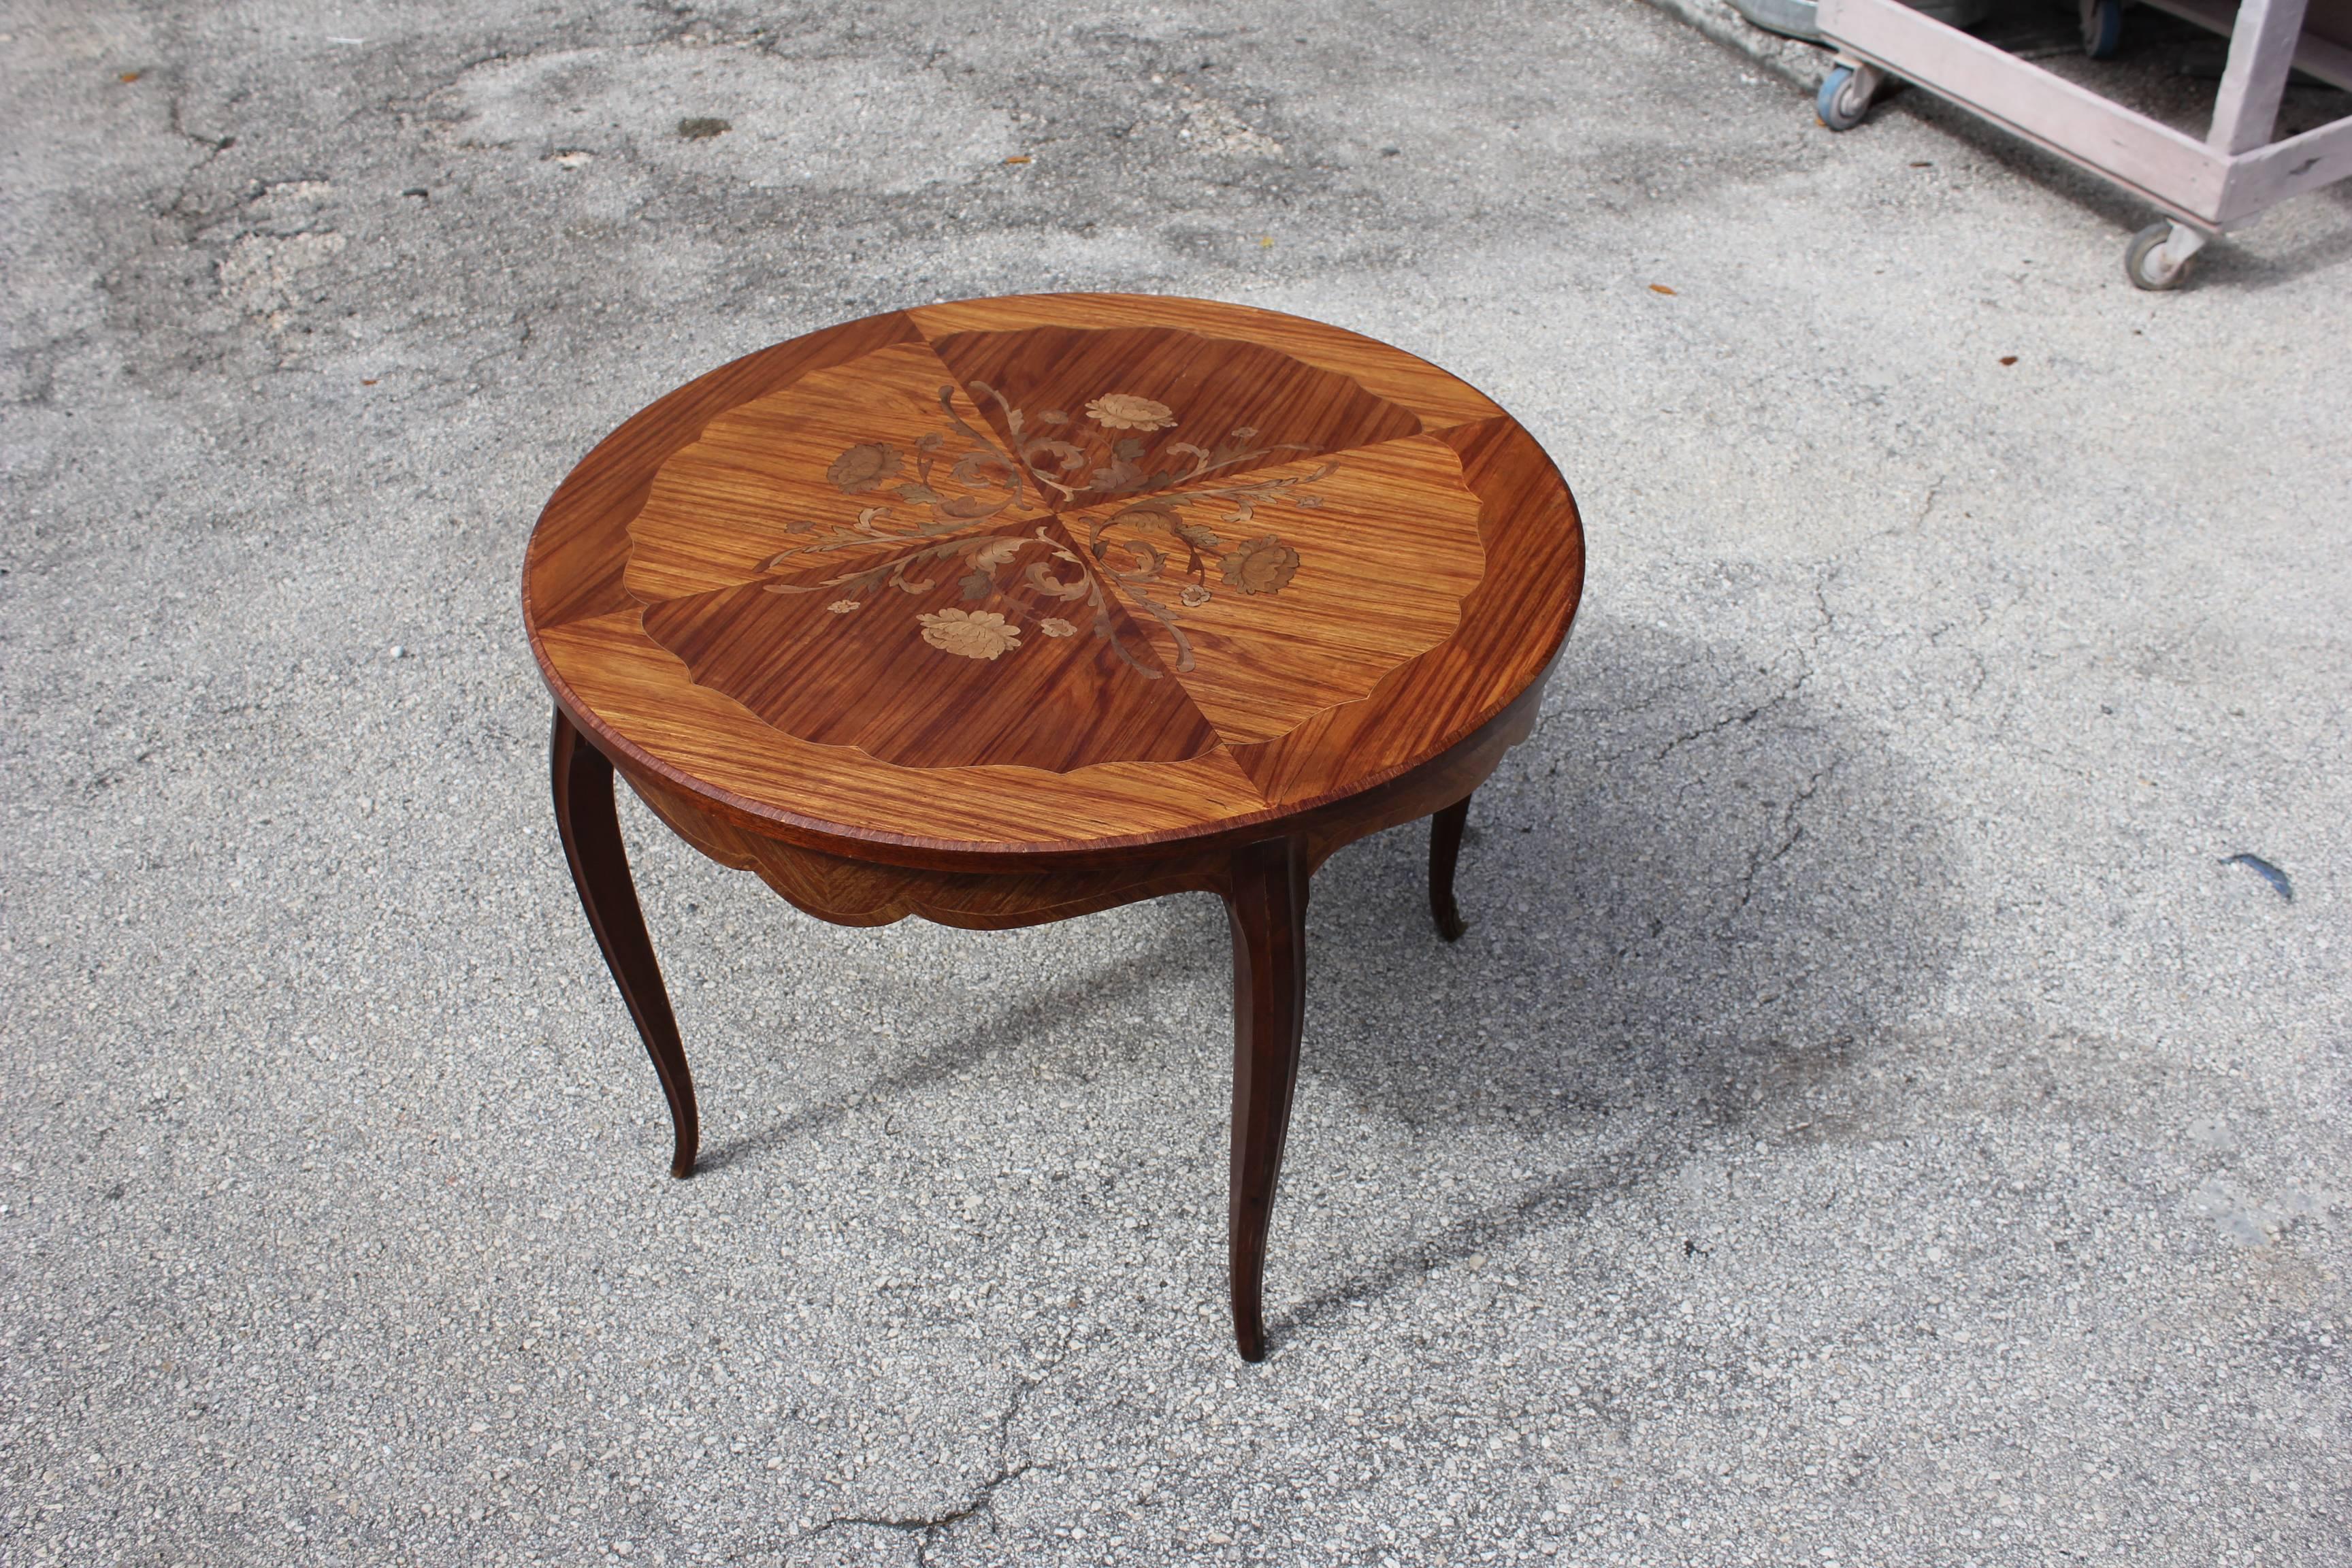 French Art Deco period accent or gueridon or side table, circa 1930. Exotic Mahogany that rest on makes it ideal next to a chair or for use as a bedside table. A fine example of Classic, French Art Deco, this table is from France, Paris.